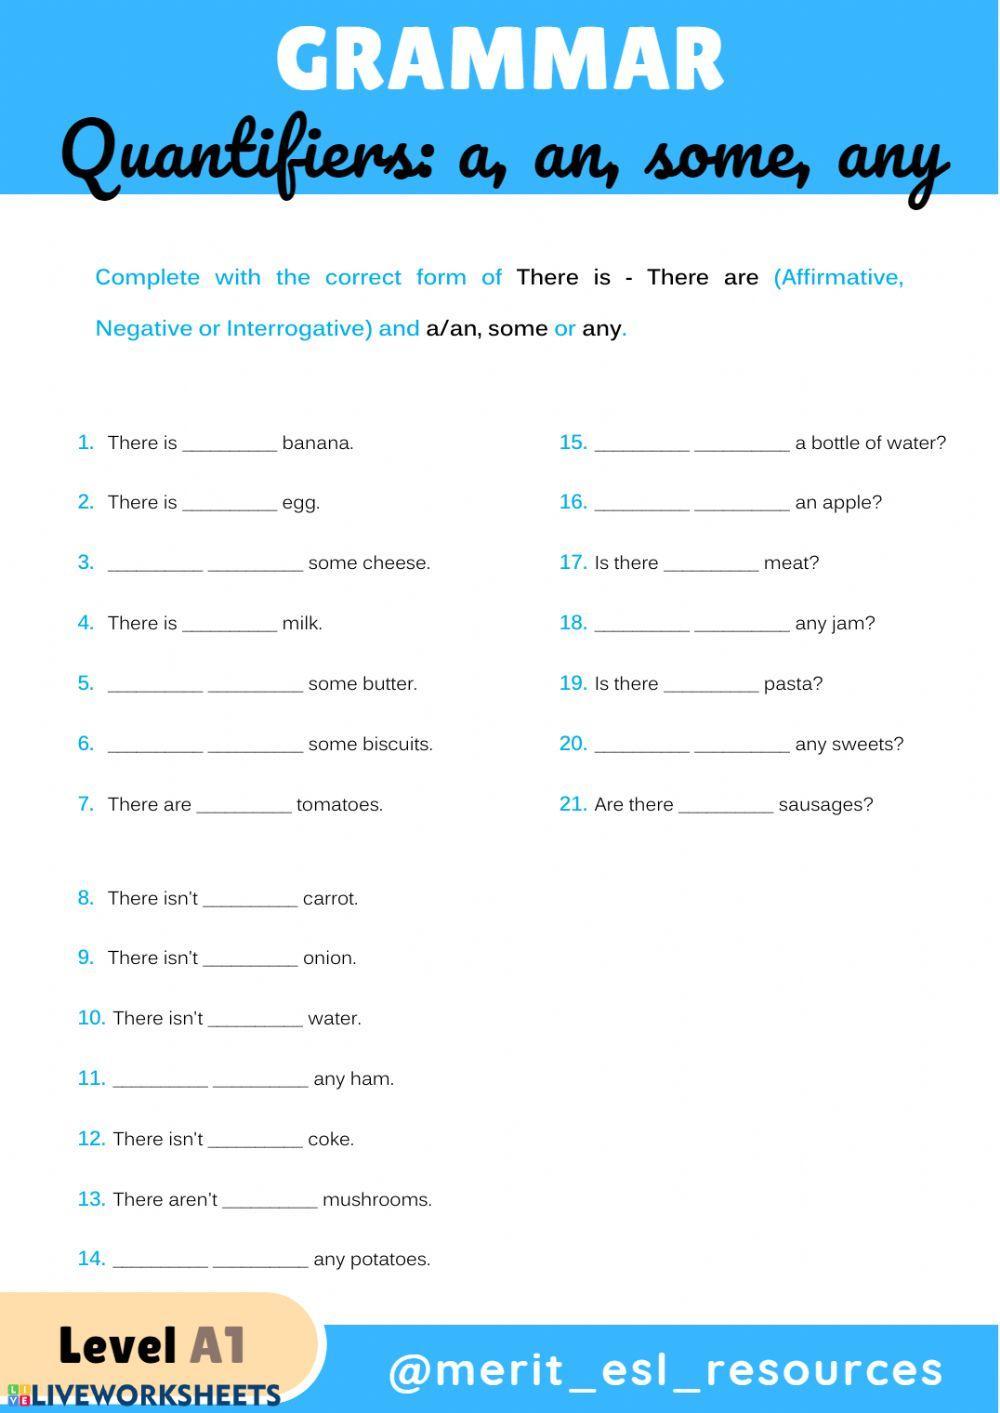 Some any worksheet for kids. Грамматика английского языка a an some. There is there are some any Worksheets. Some any no Worksheets for Kids. Some any Worksheets.